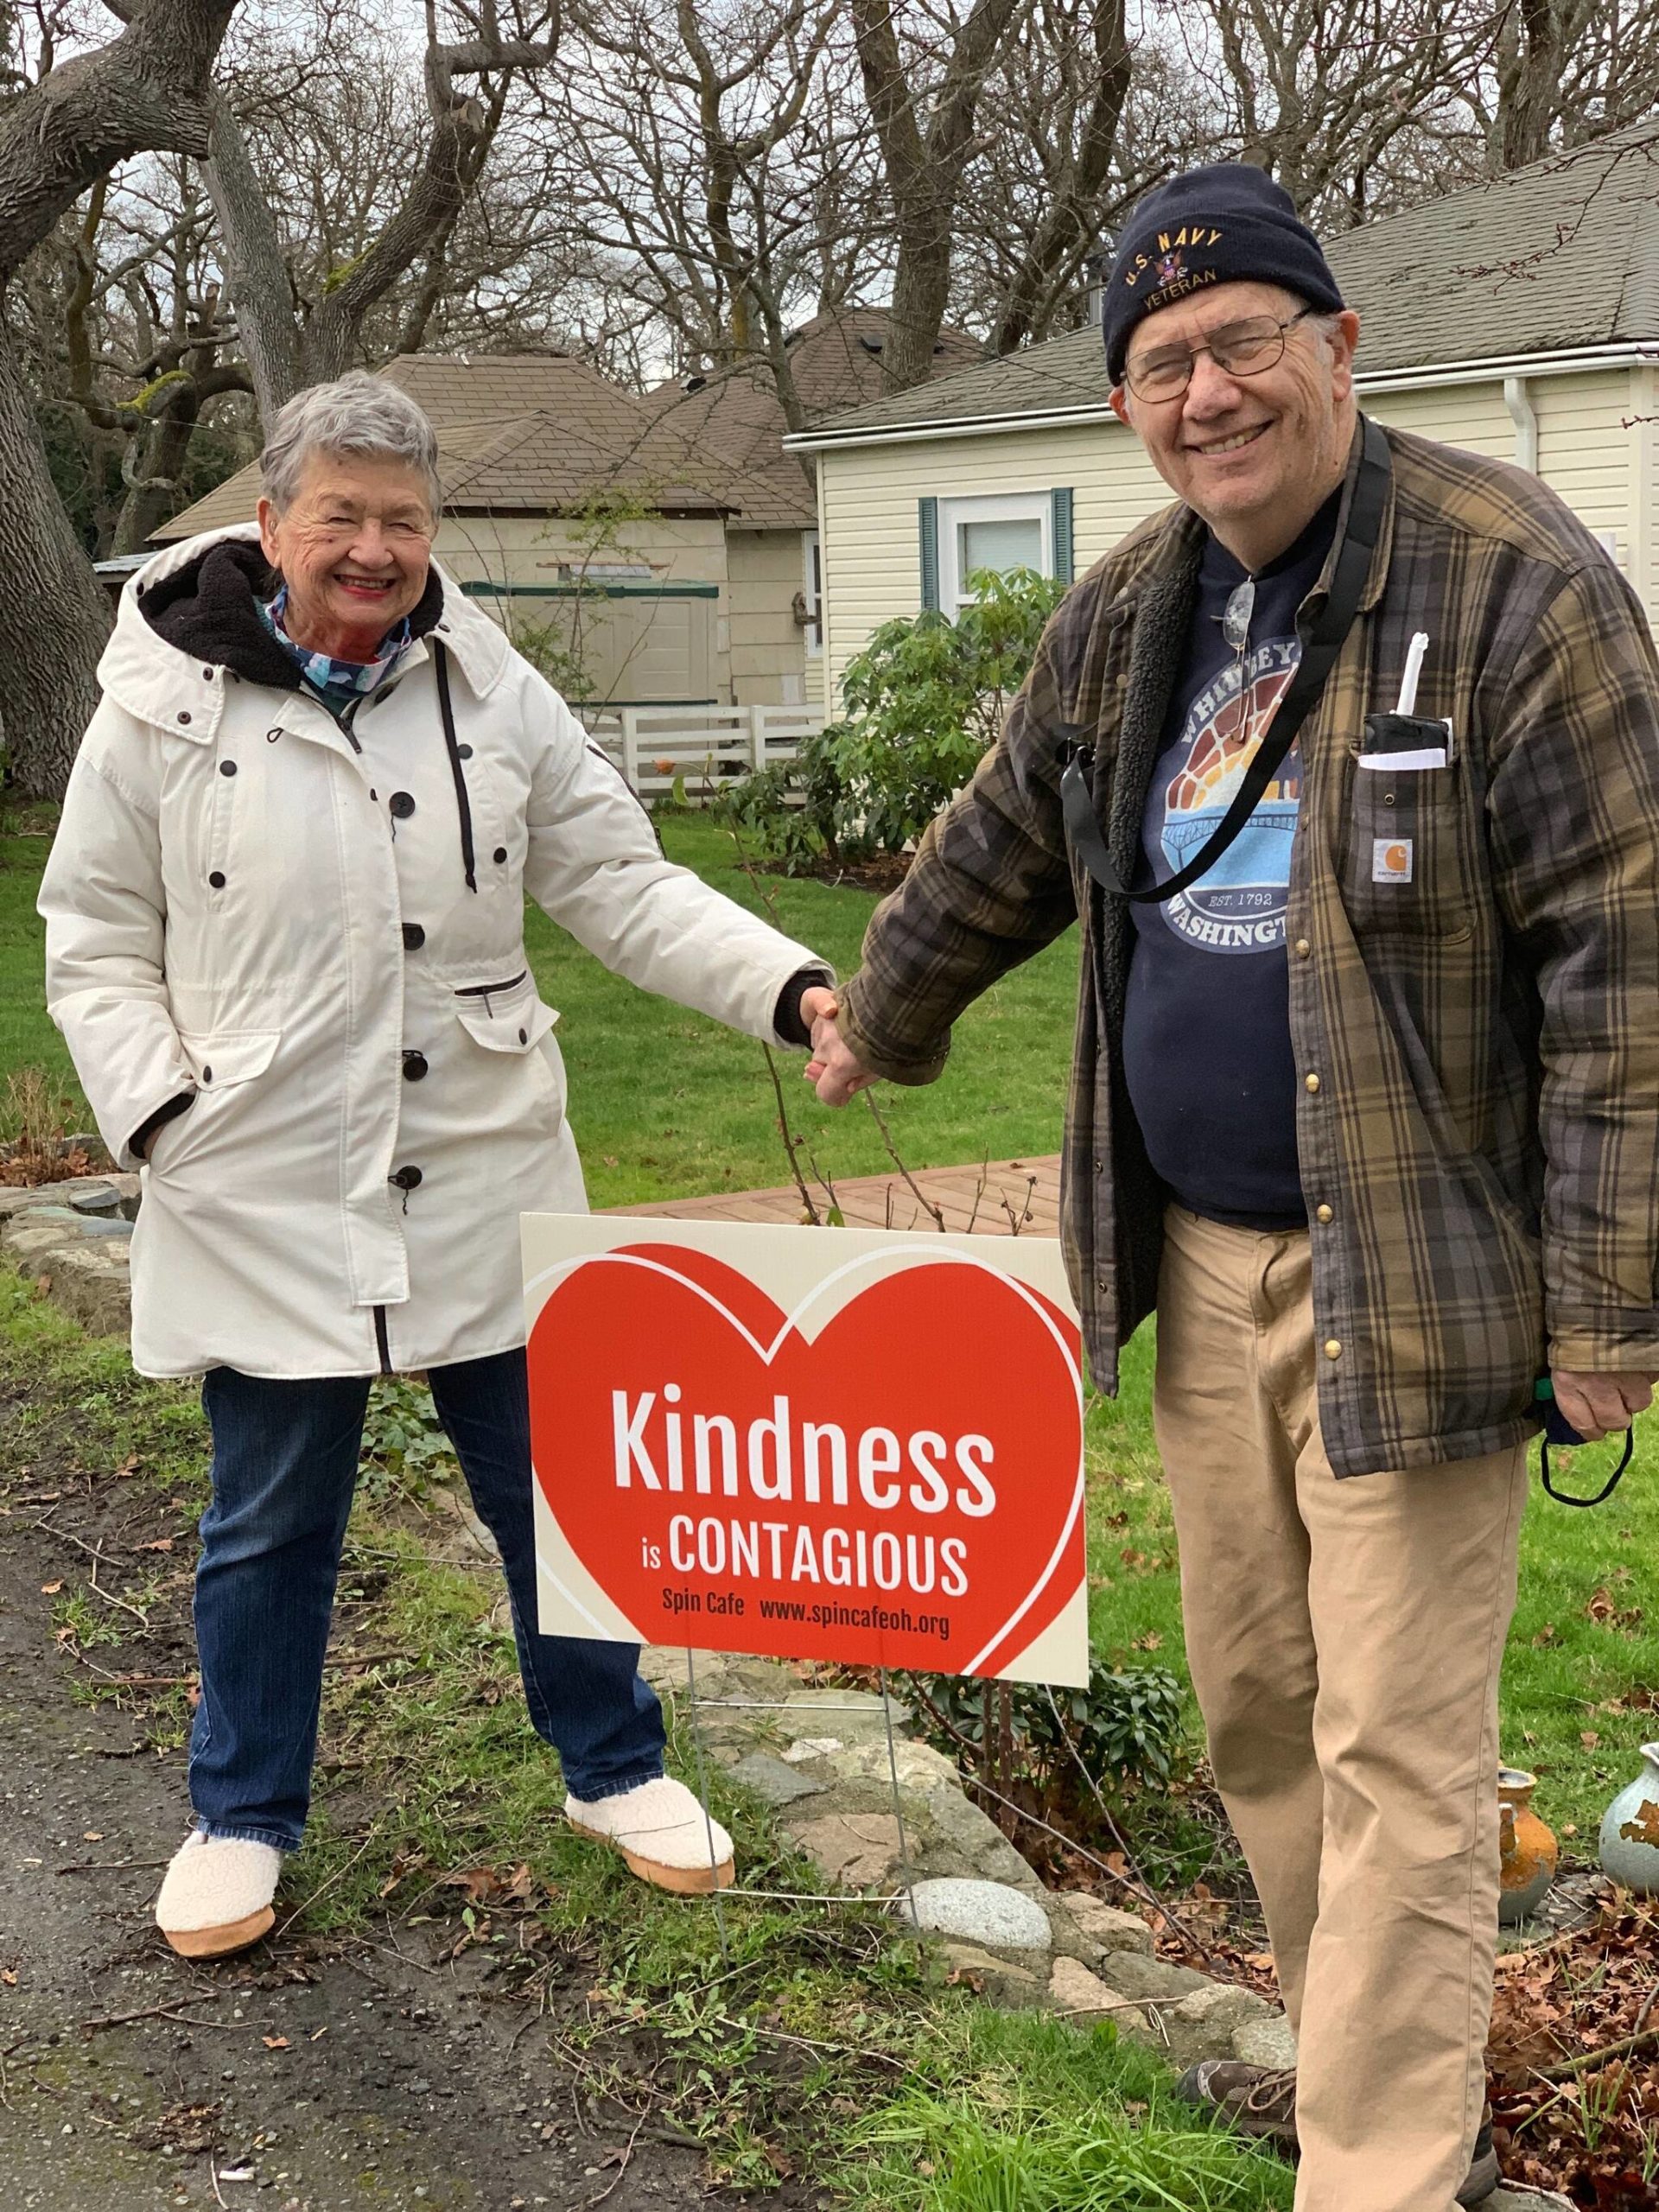 Photo provided
Carol and Bob Wall display a “Kindness is Contagious” sign from the campaign they founded to promote civil discourse.